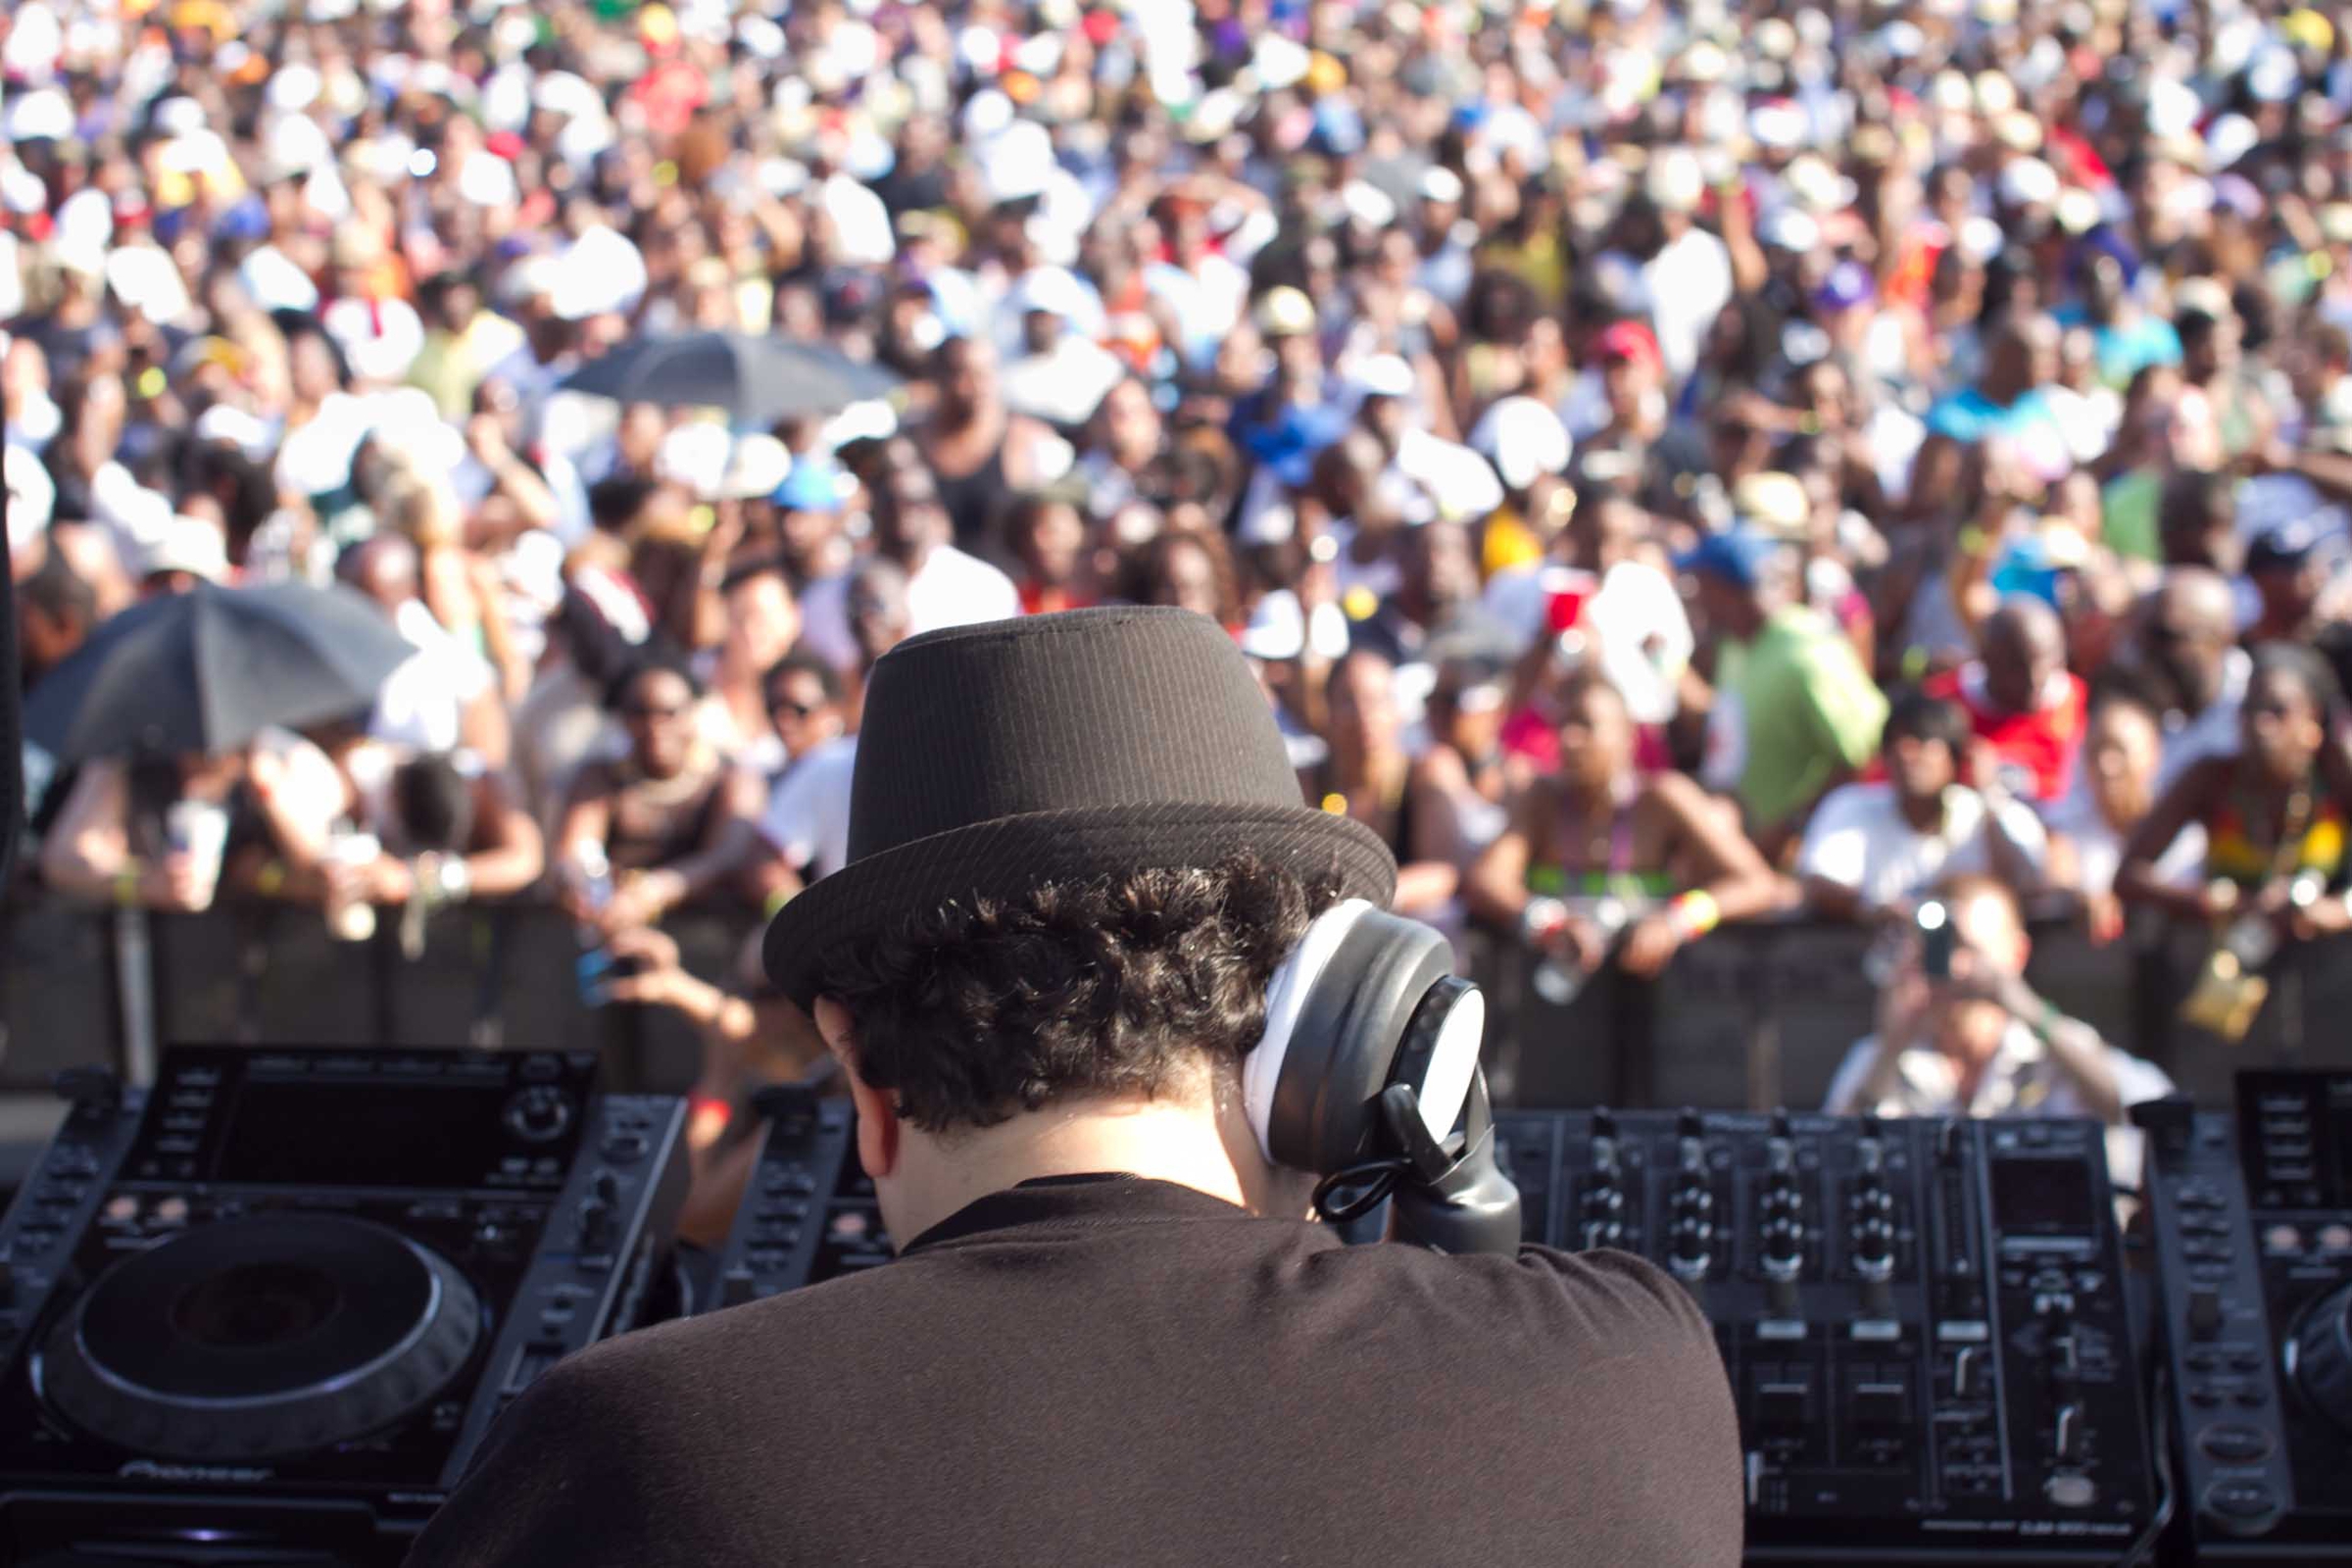 Louie Vega from New York was the first DJ not from Chicago to be the featured DJ at the Chosen Few Picnic.